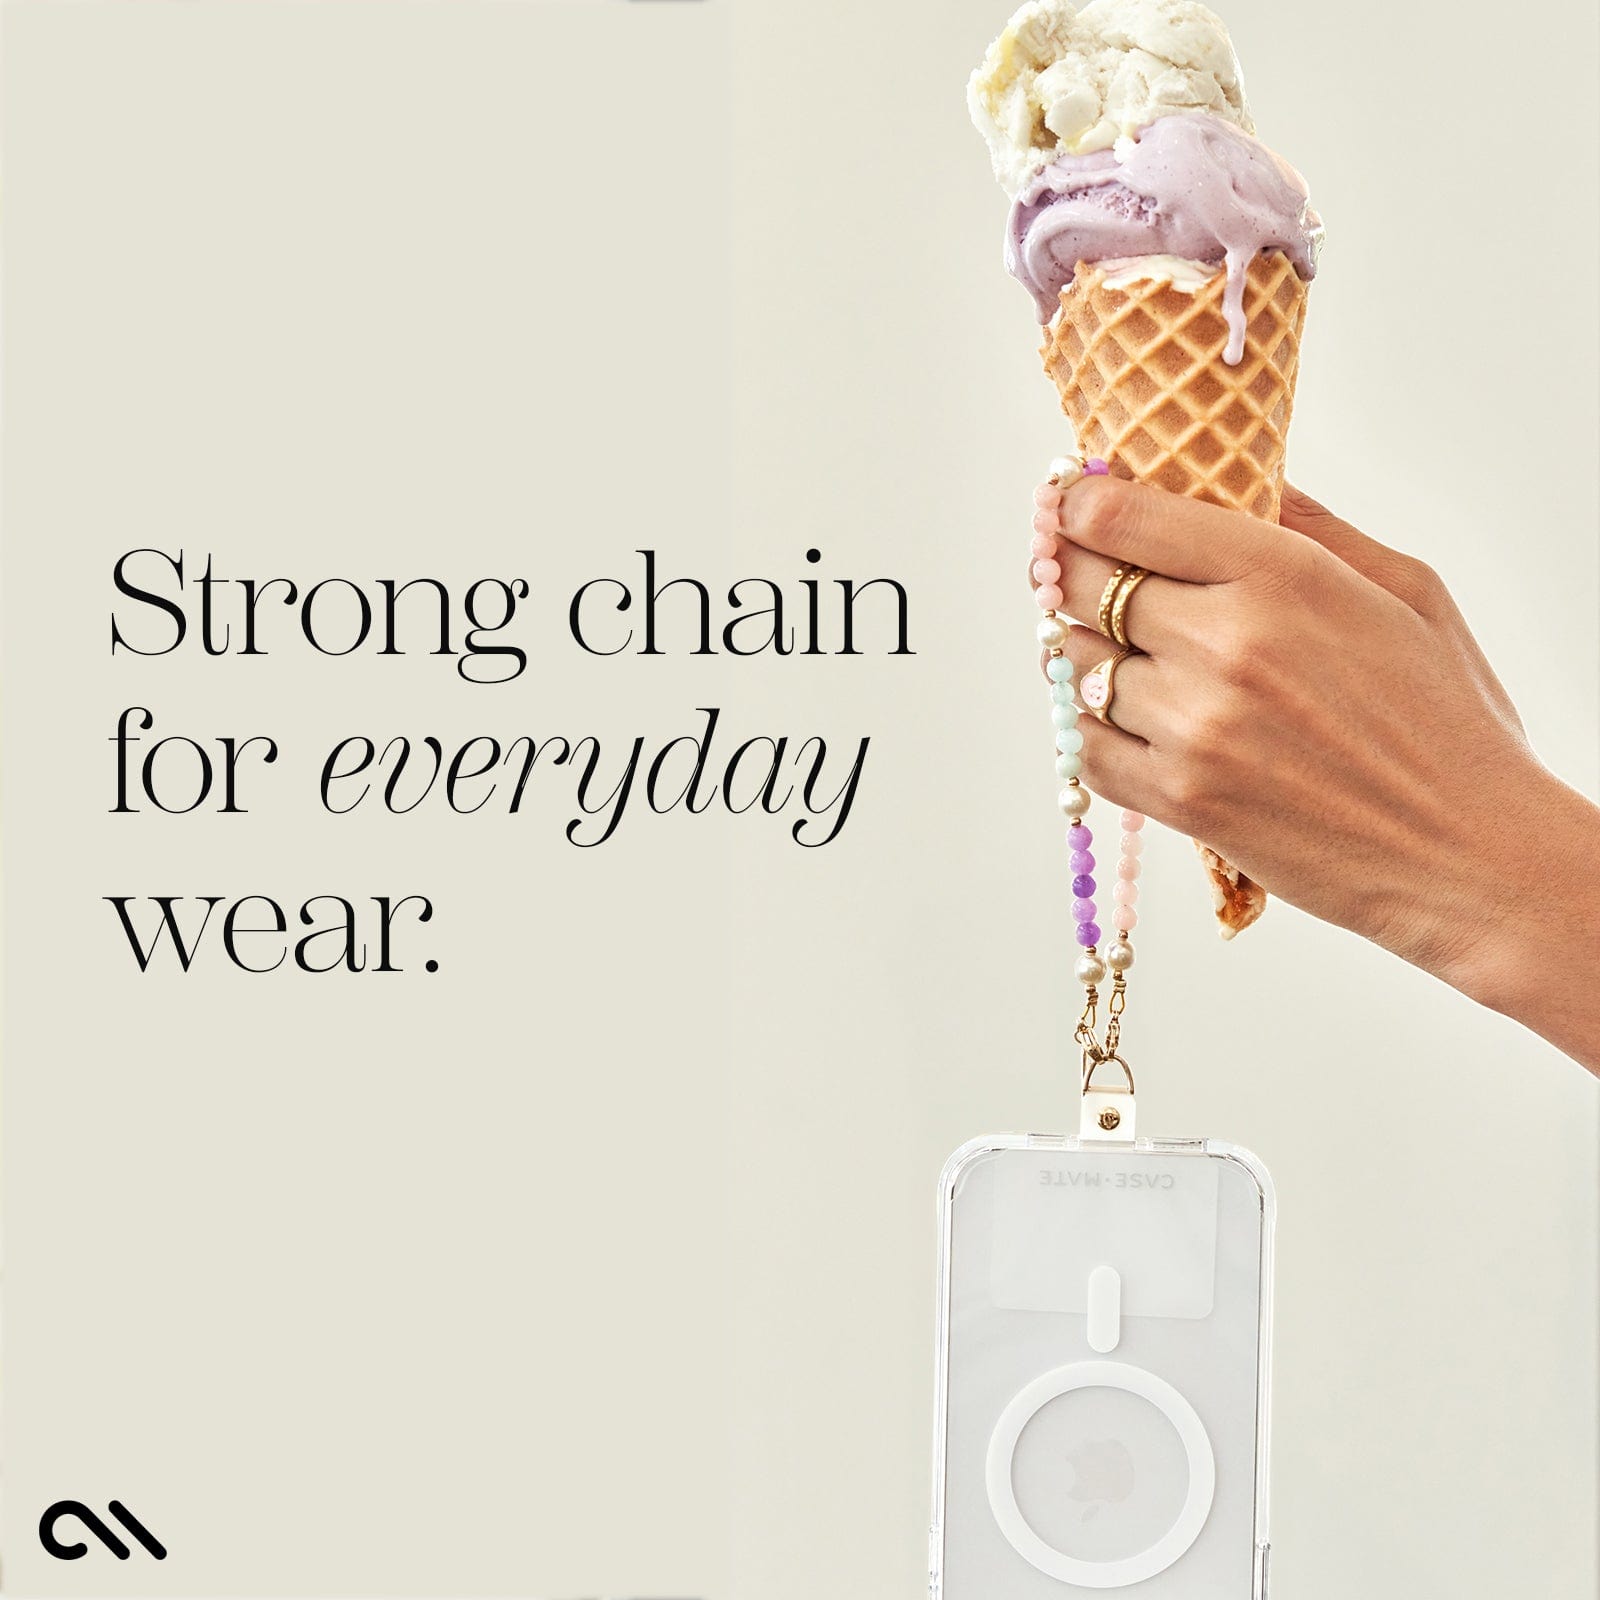 STRONG CHAIN FOR EVERYDAY WEAR.